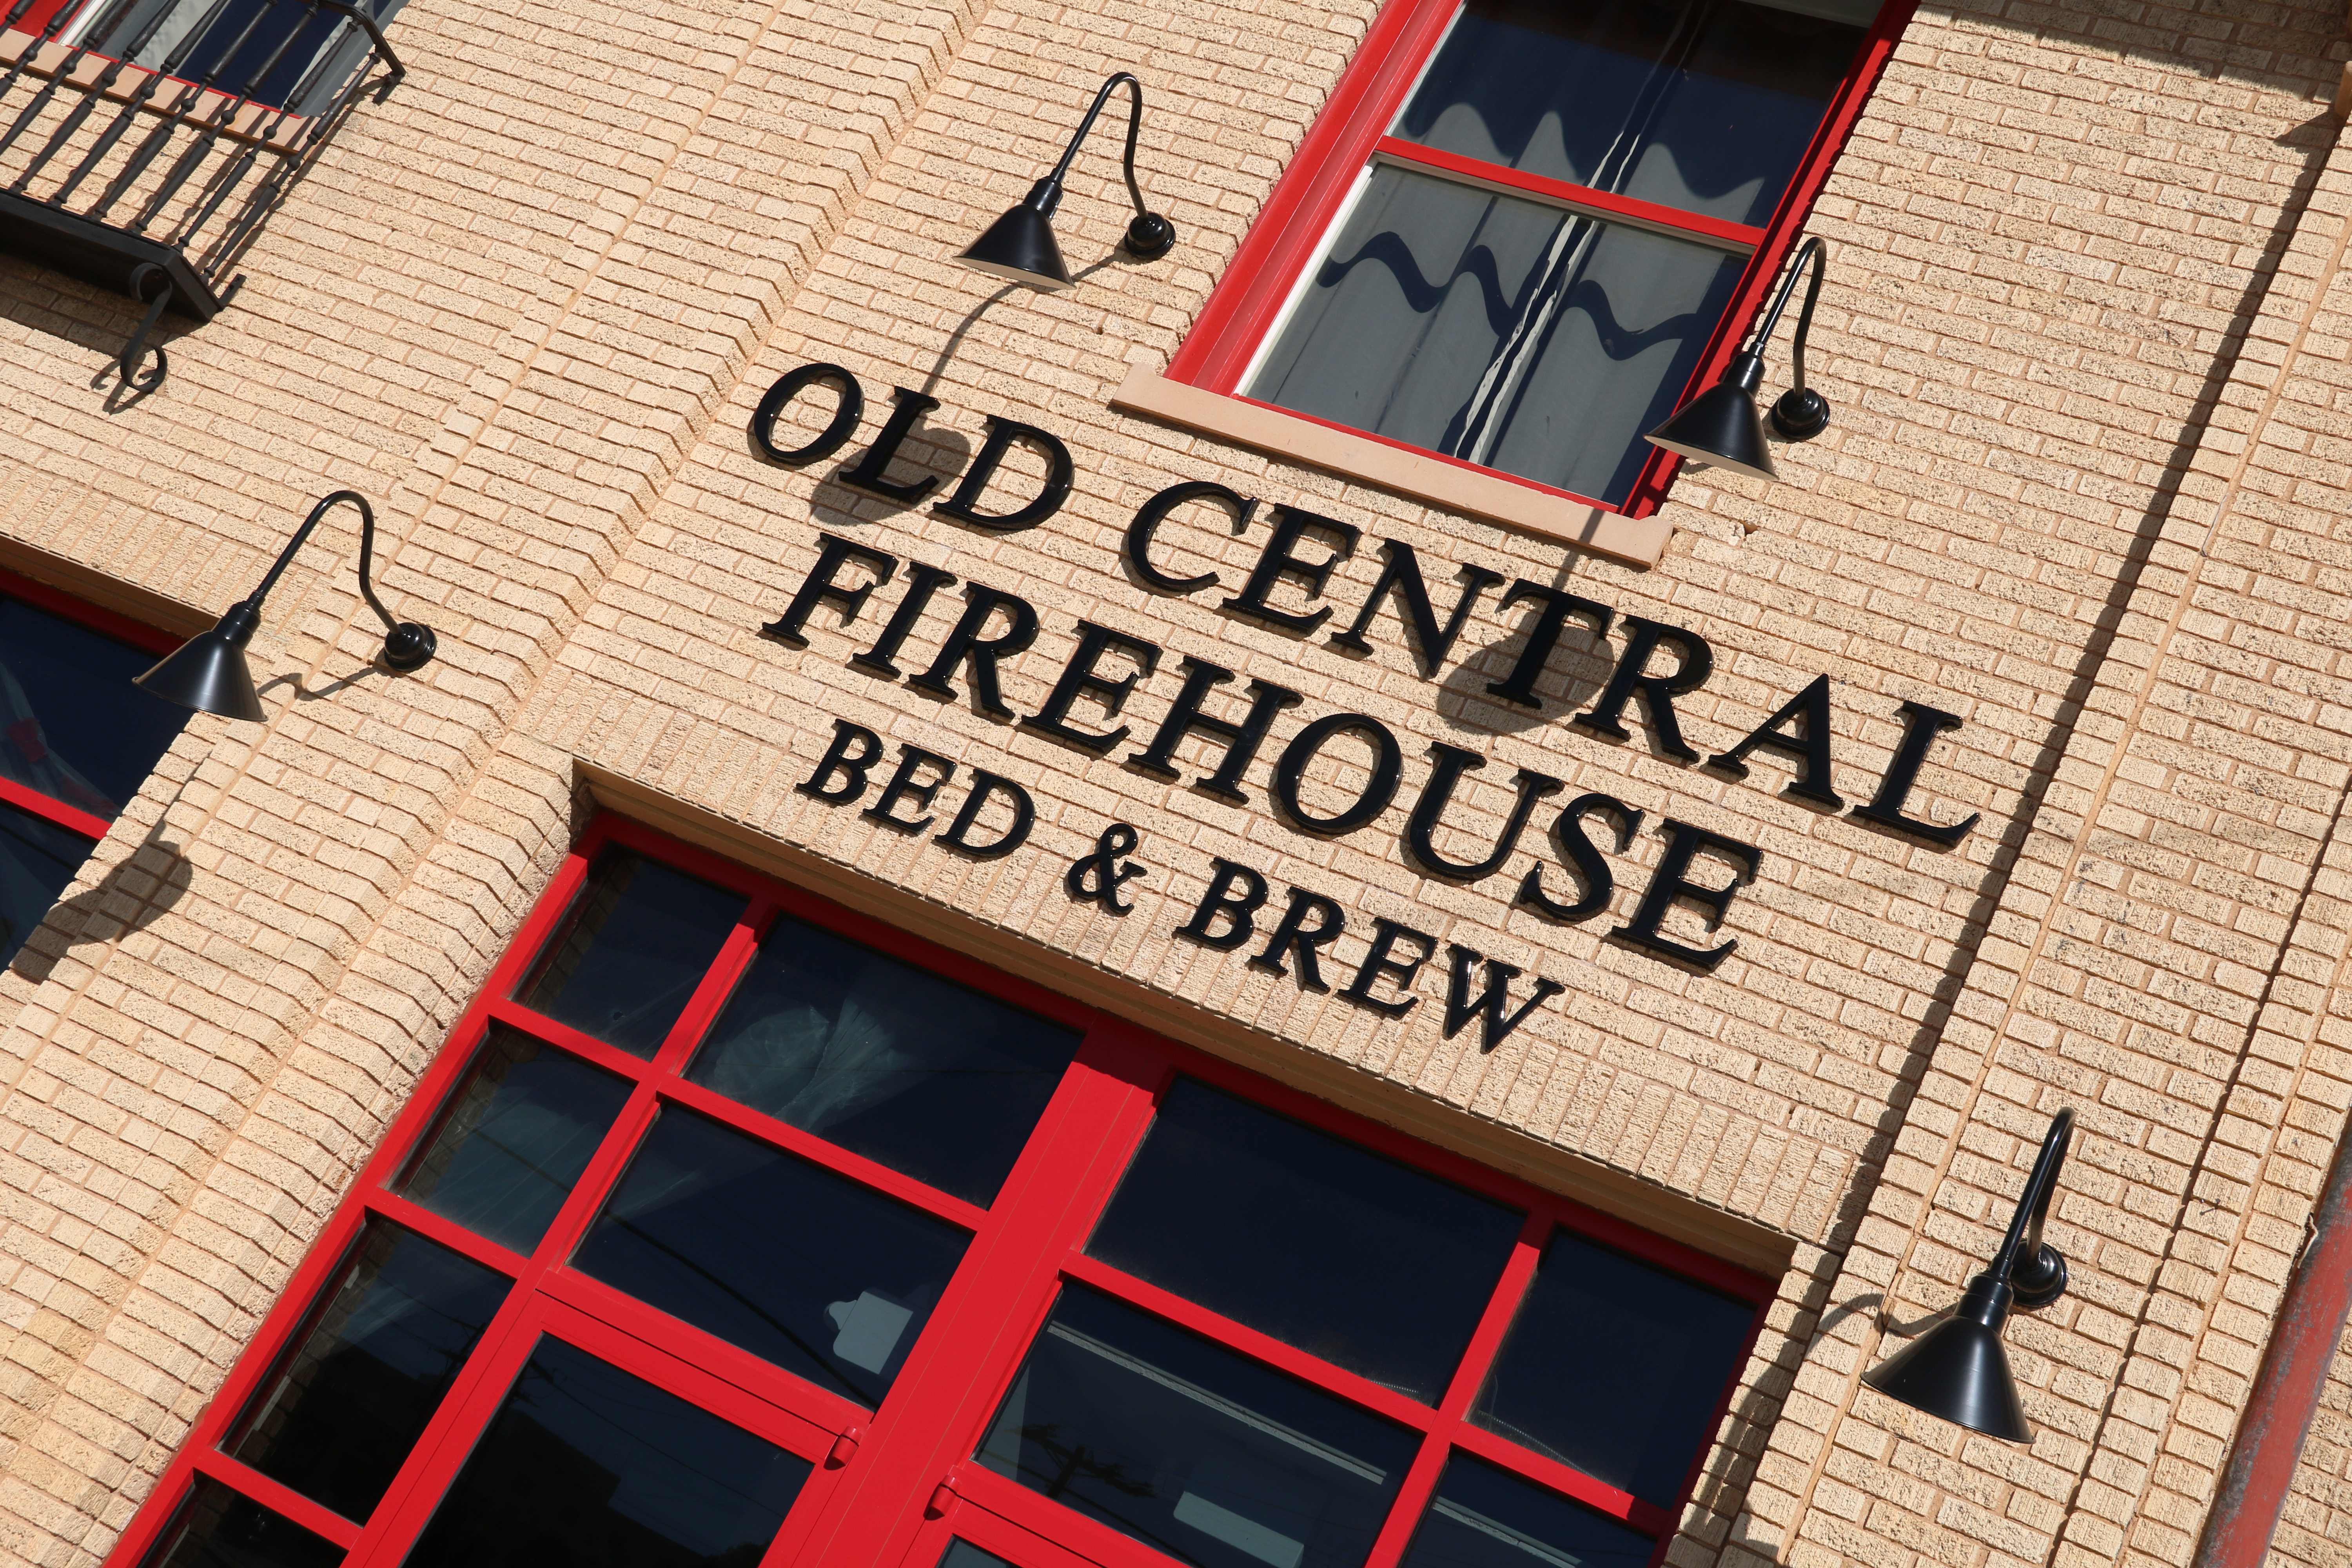 Old Central Firehouse Bed and Brew